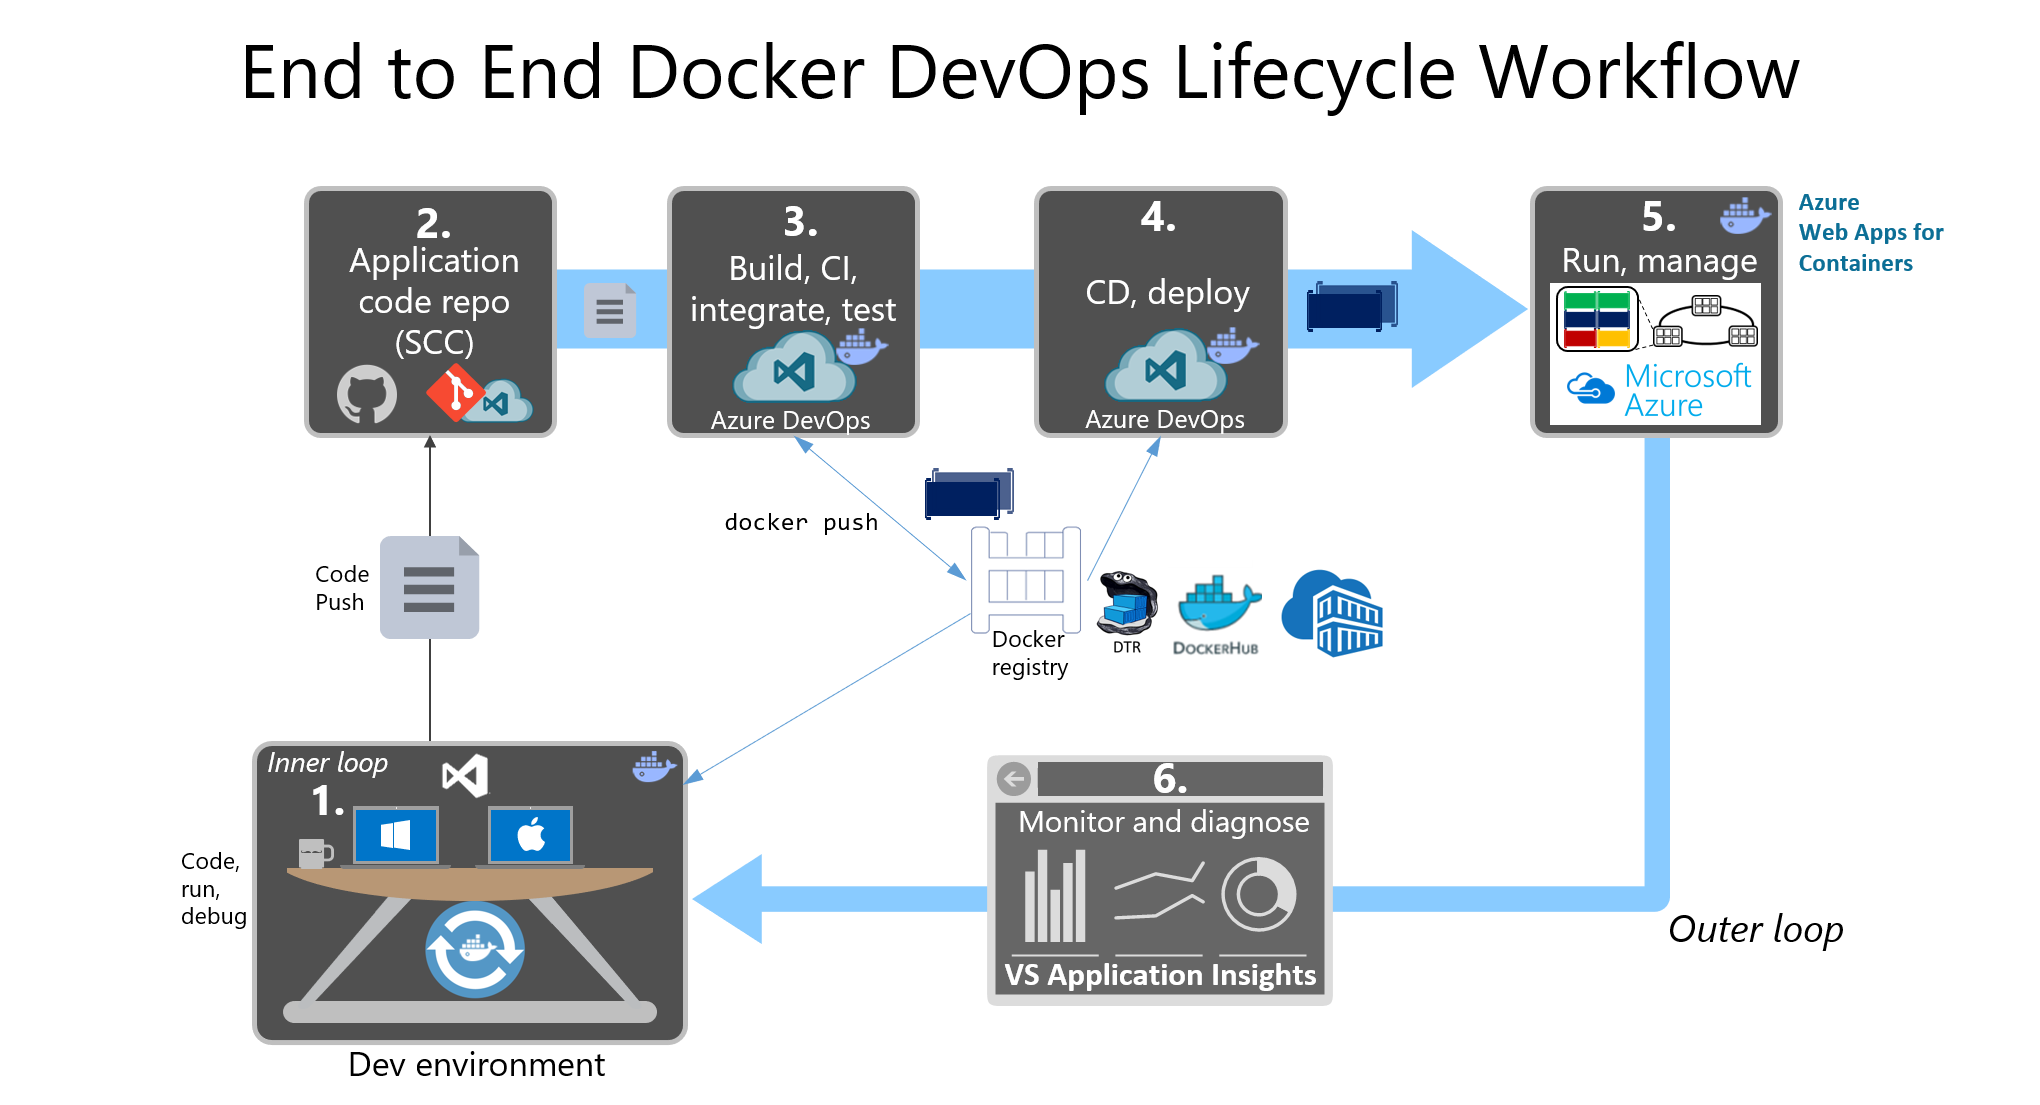 End to End Docker DevOps Lifecycle Workflow